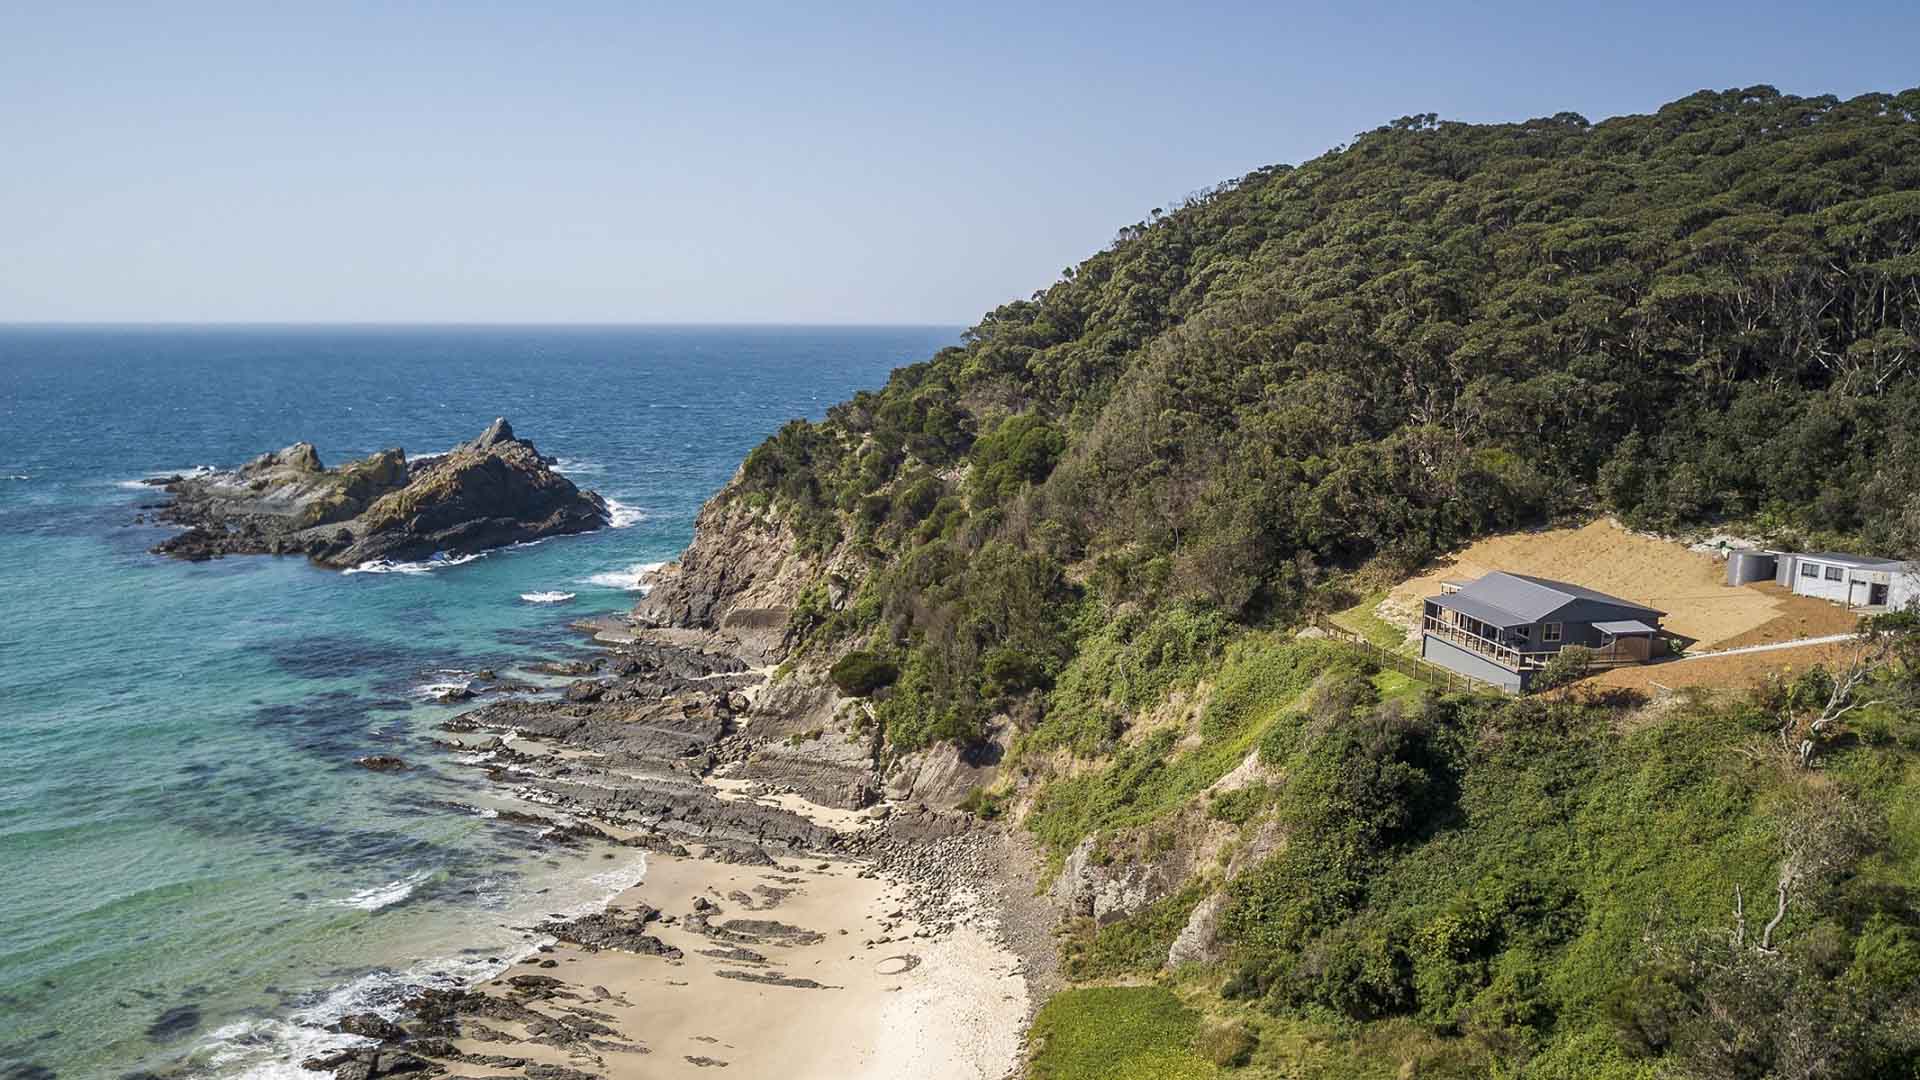 These Three Refurbished Cottages in NSW's National Parks Are Now Available for Scenic Getaways